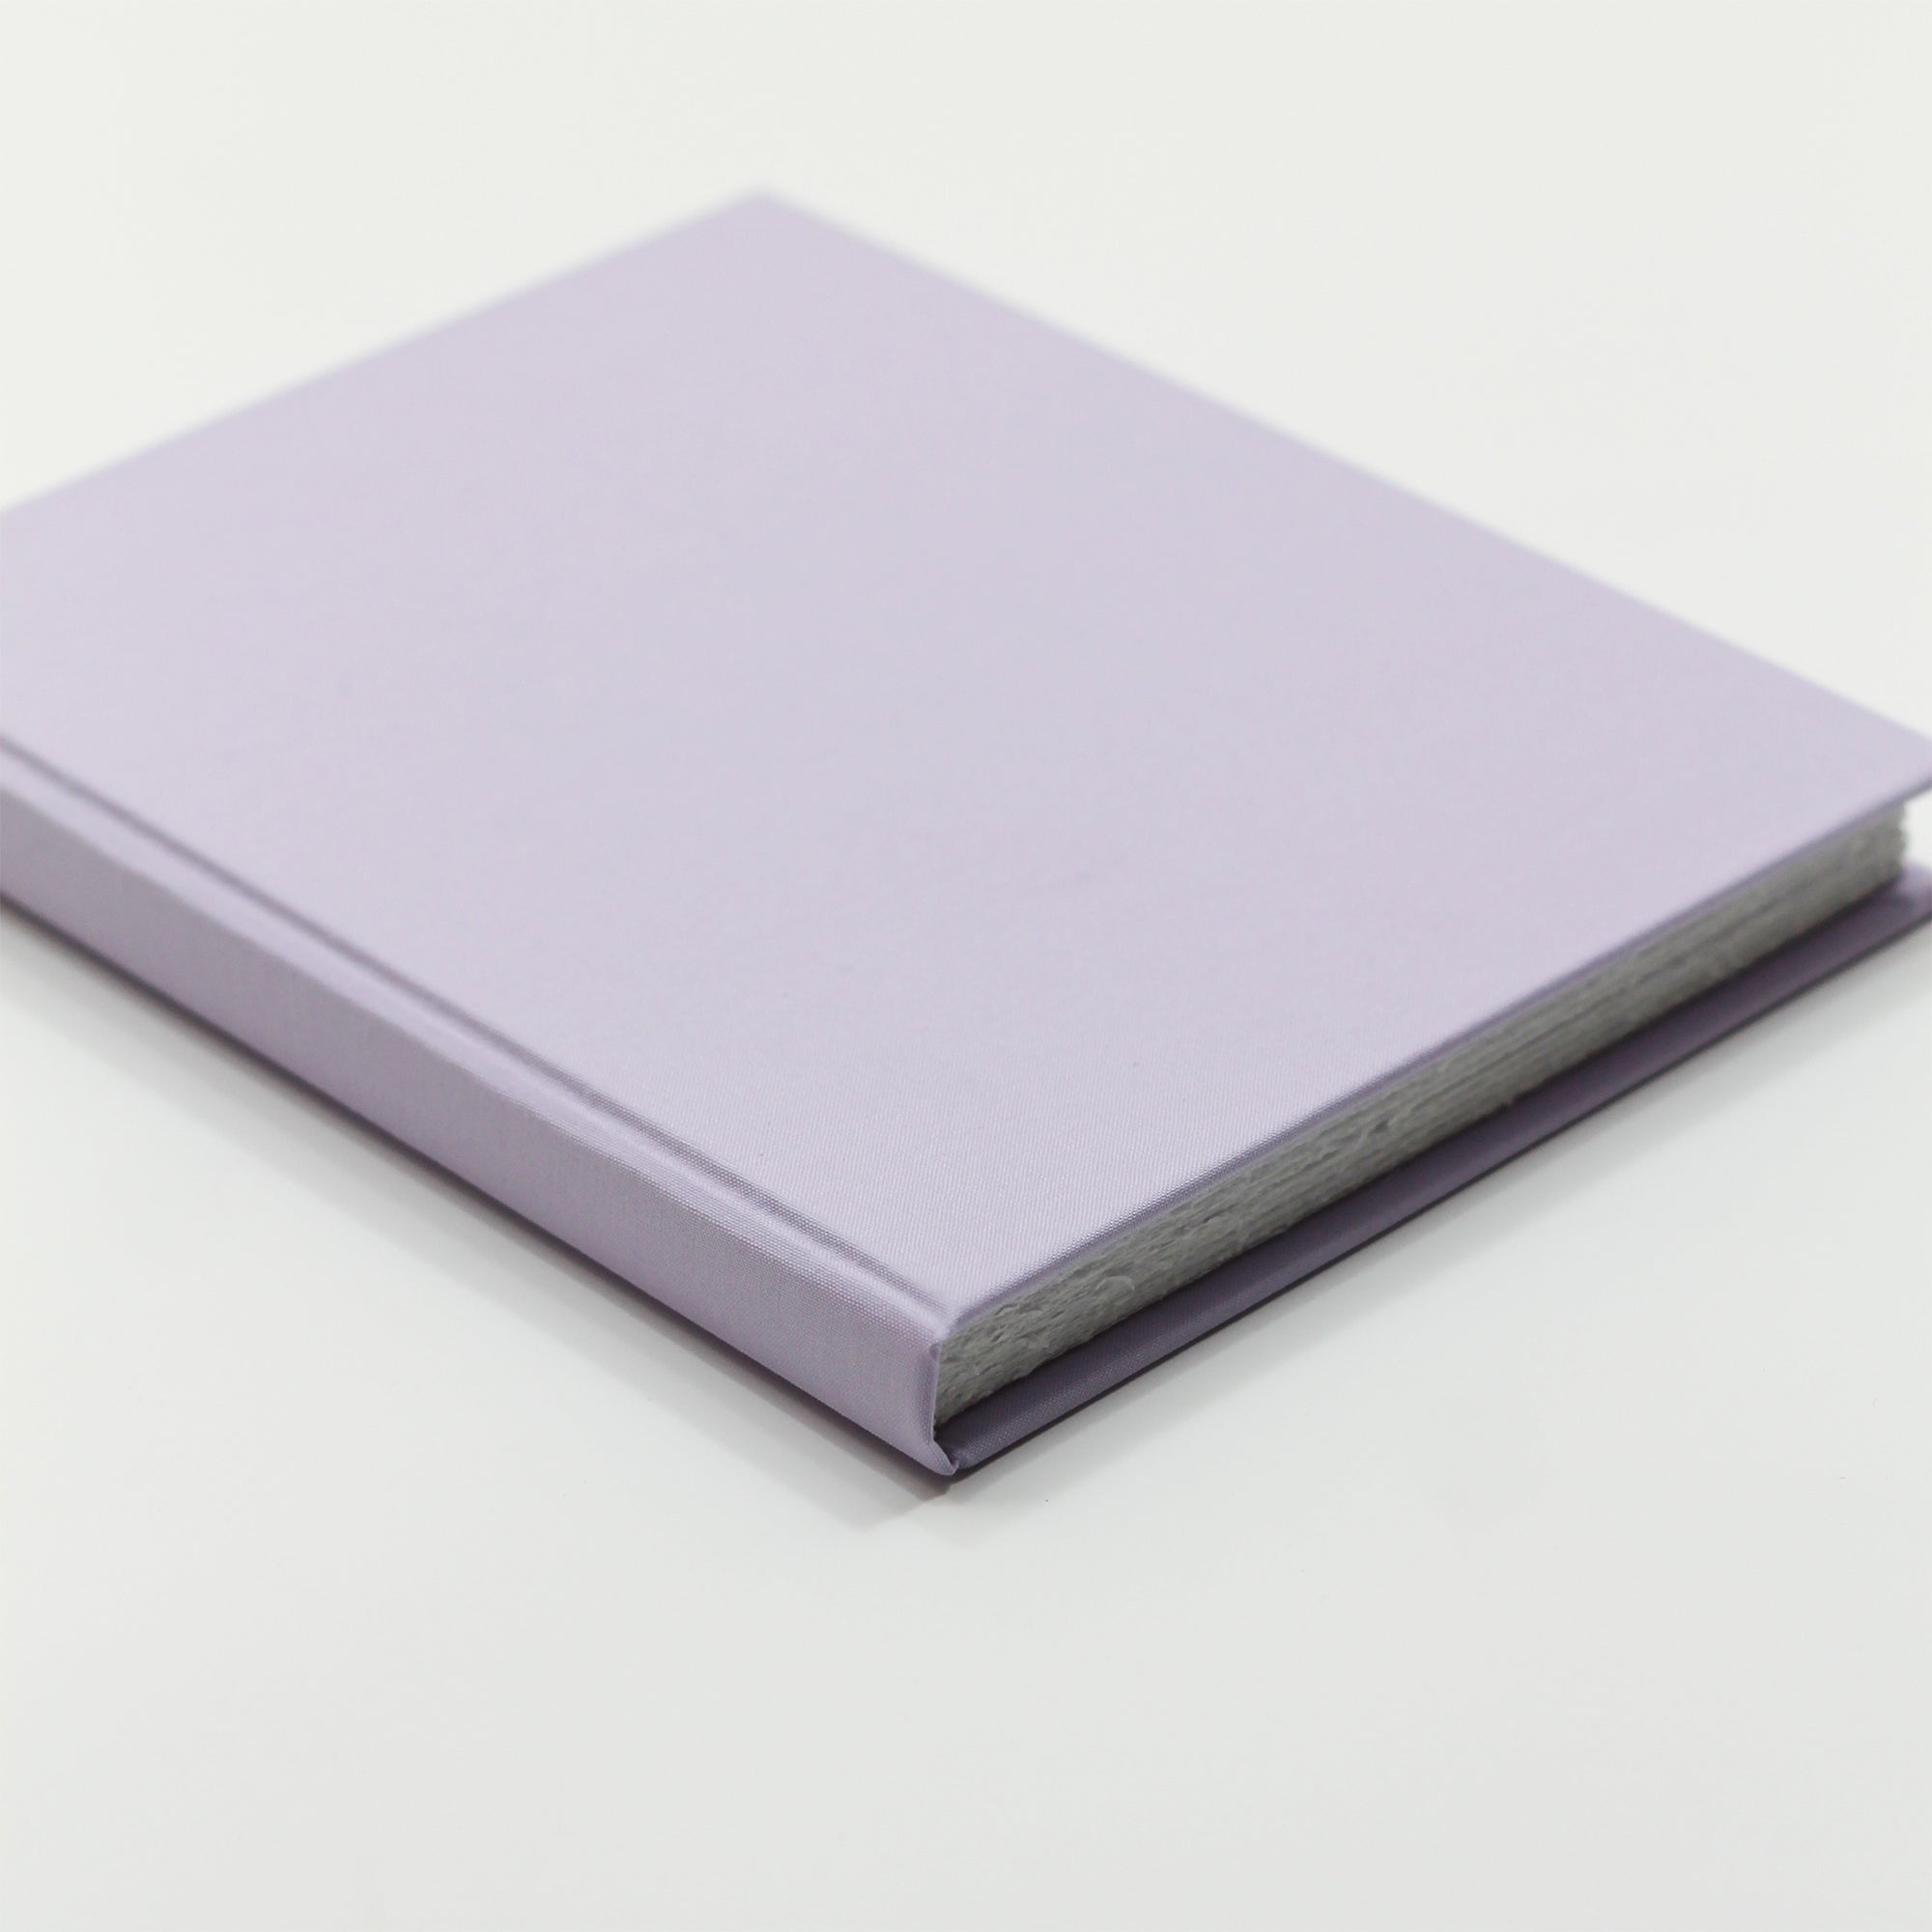 Large 8x10 Blank Page Journal, Cover: Lavender Cotton